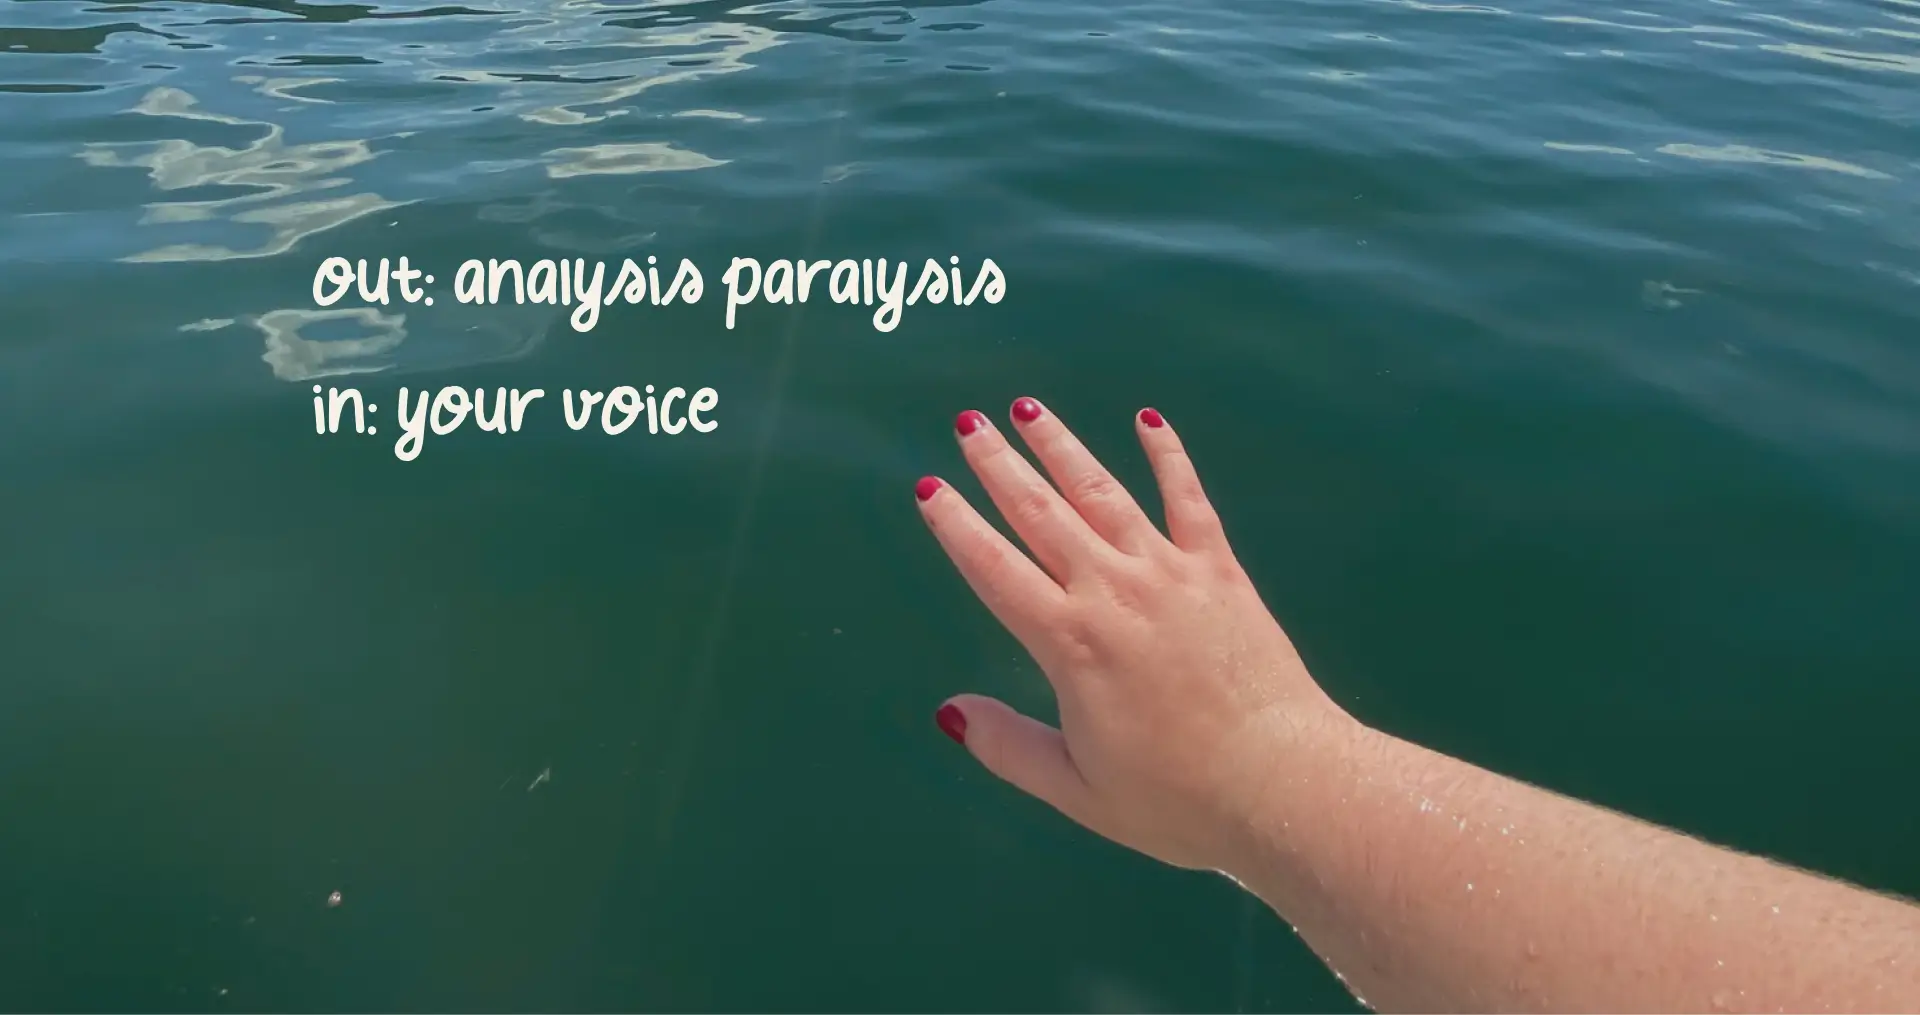 Mariia's hand, nails painted in berry red, against the lake.